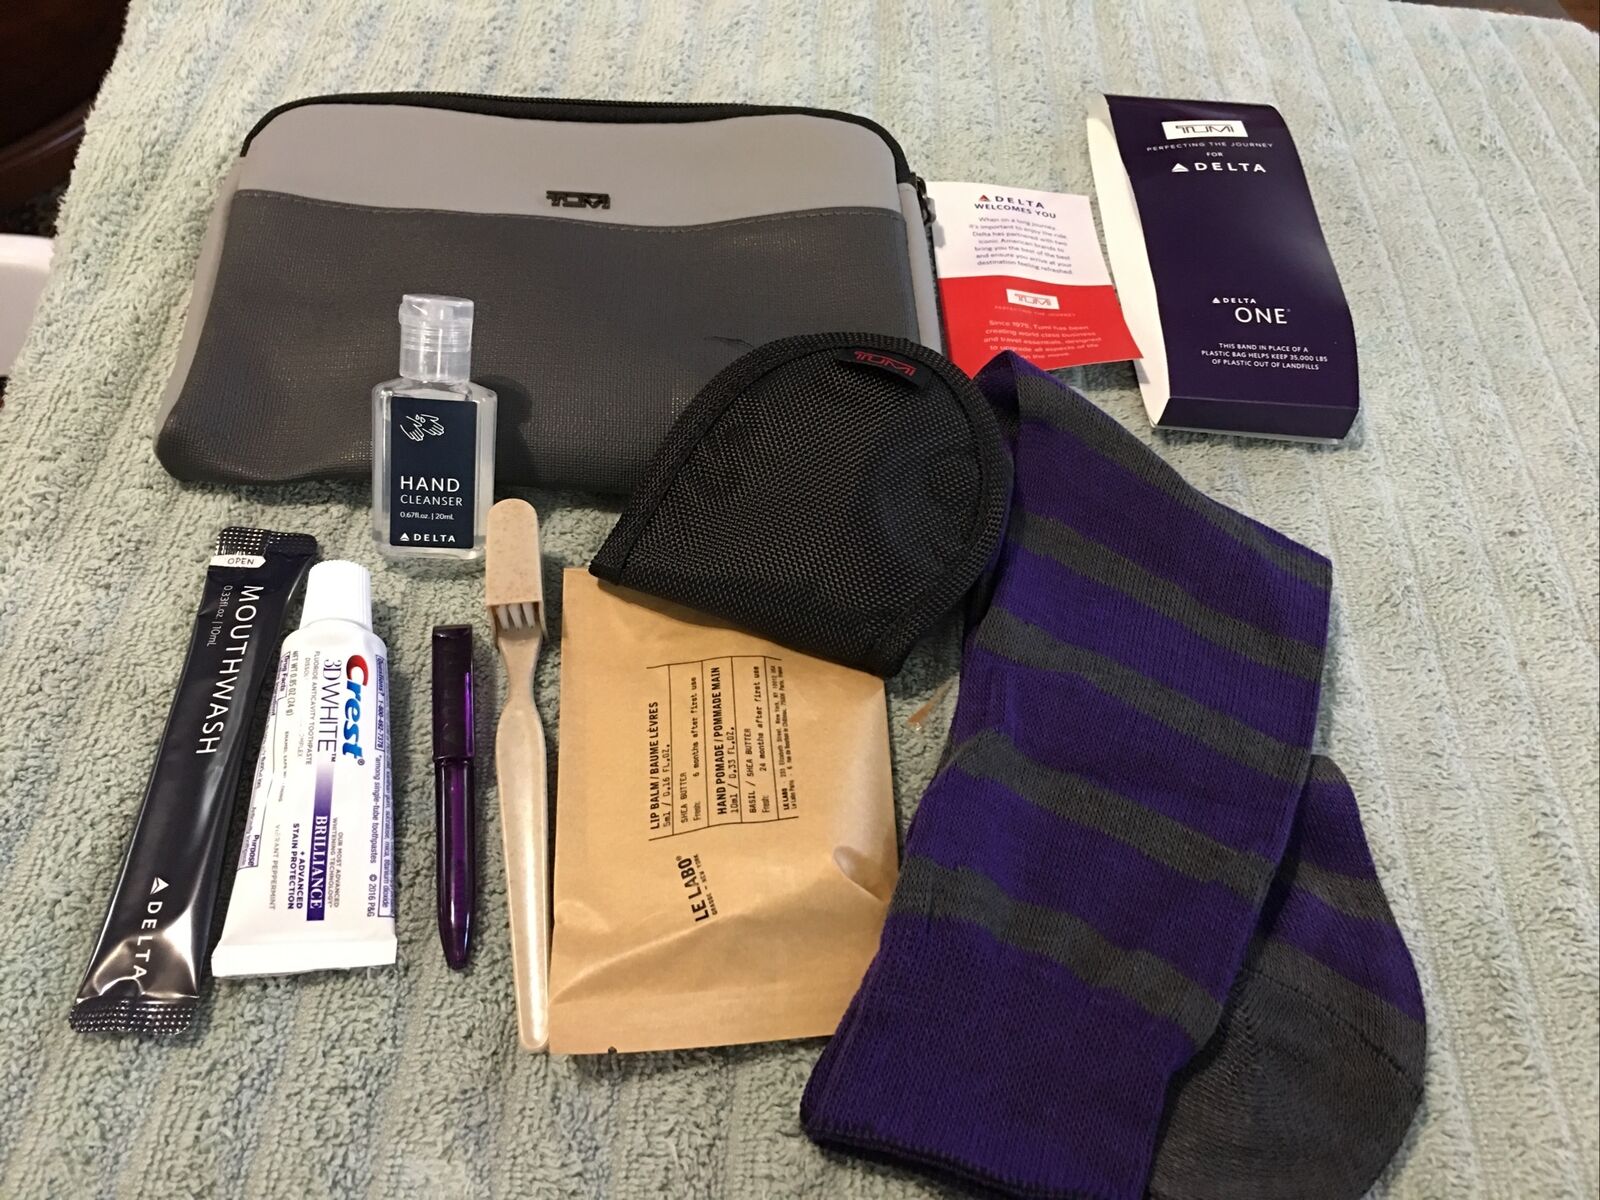 Delta Airline One Soft Tumi Amenity Kit Travel Bag New See Pictures For Items